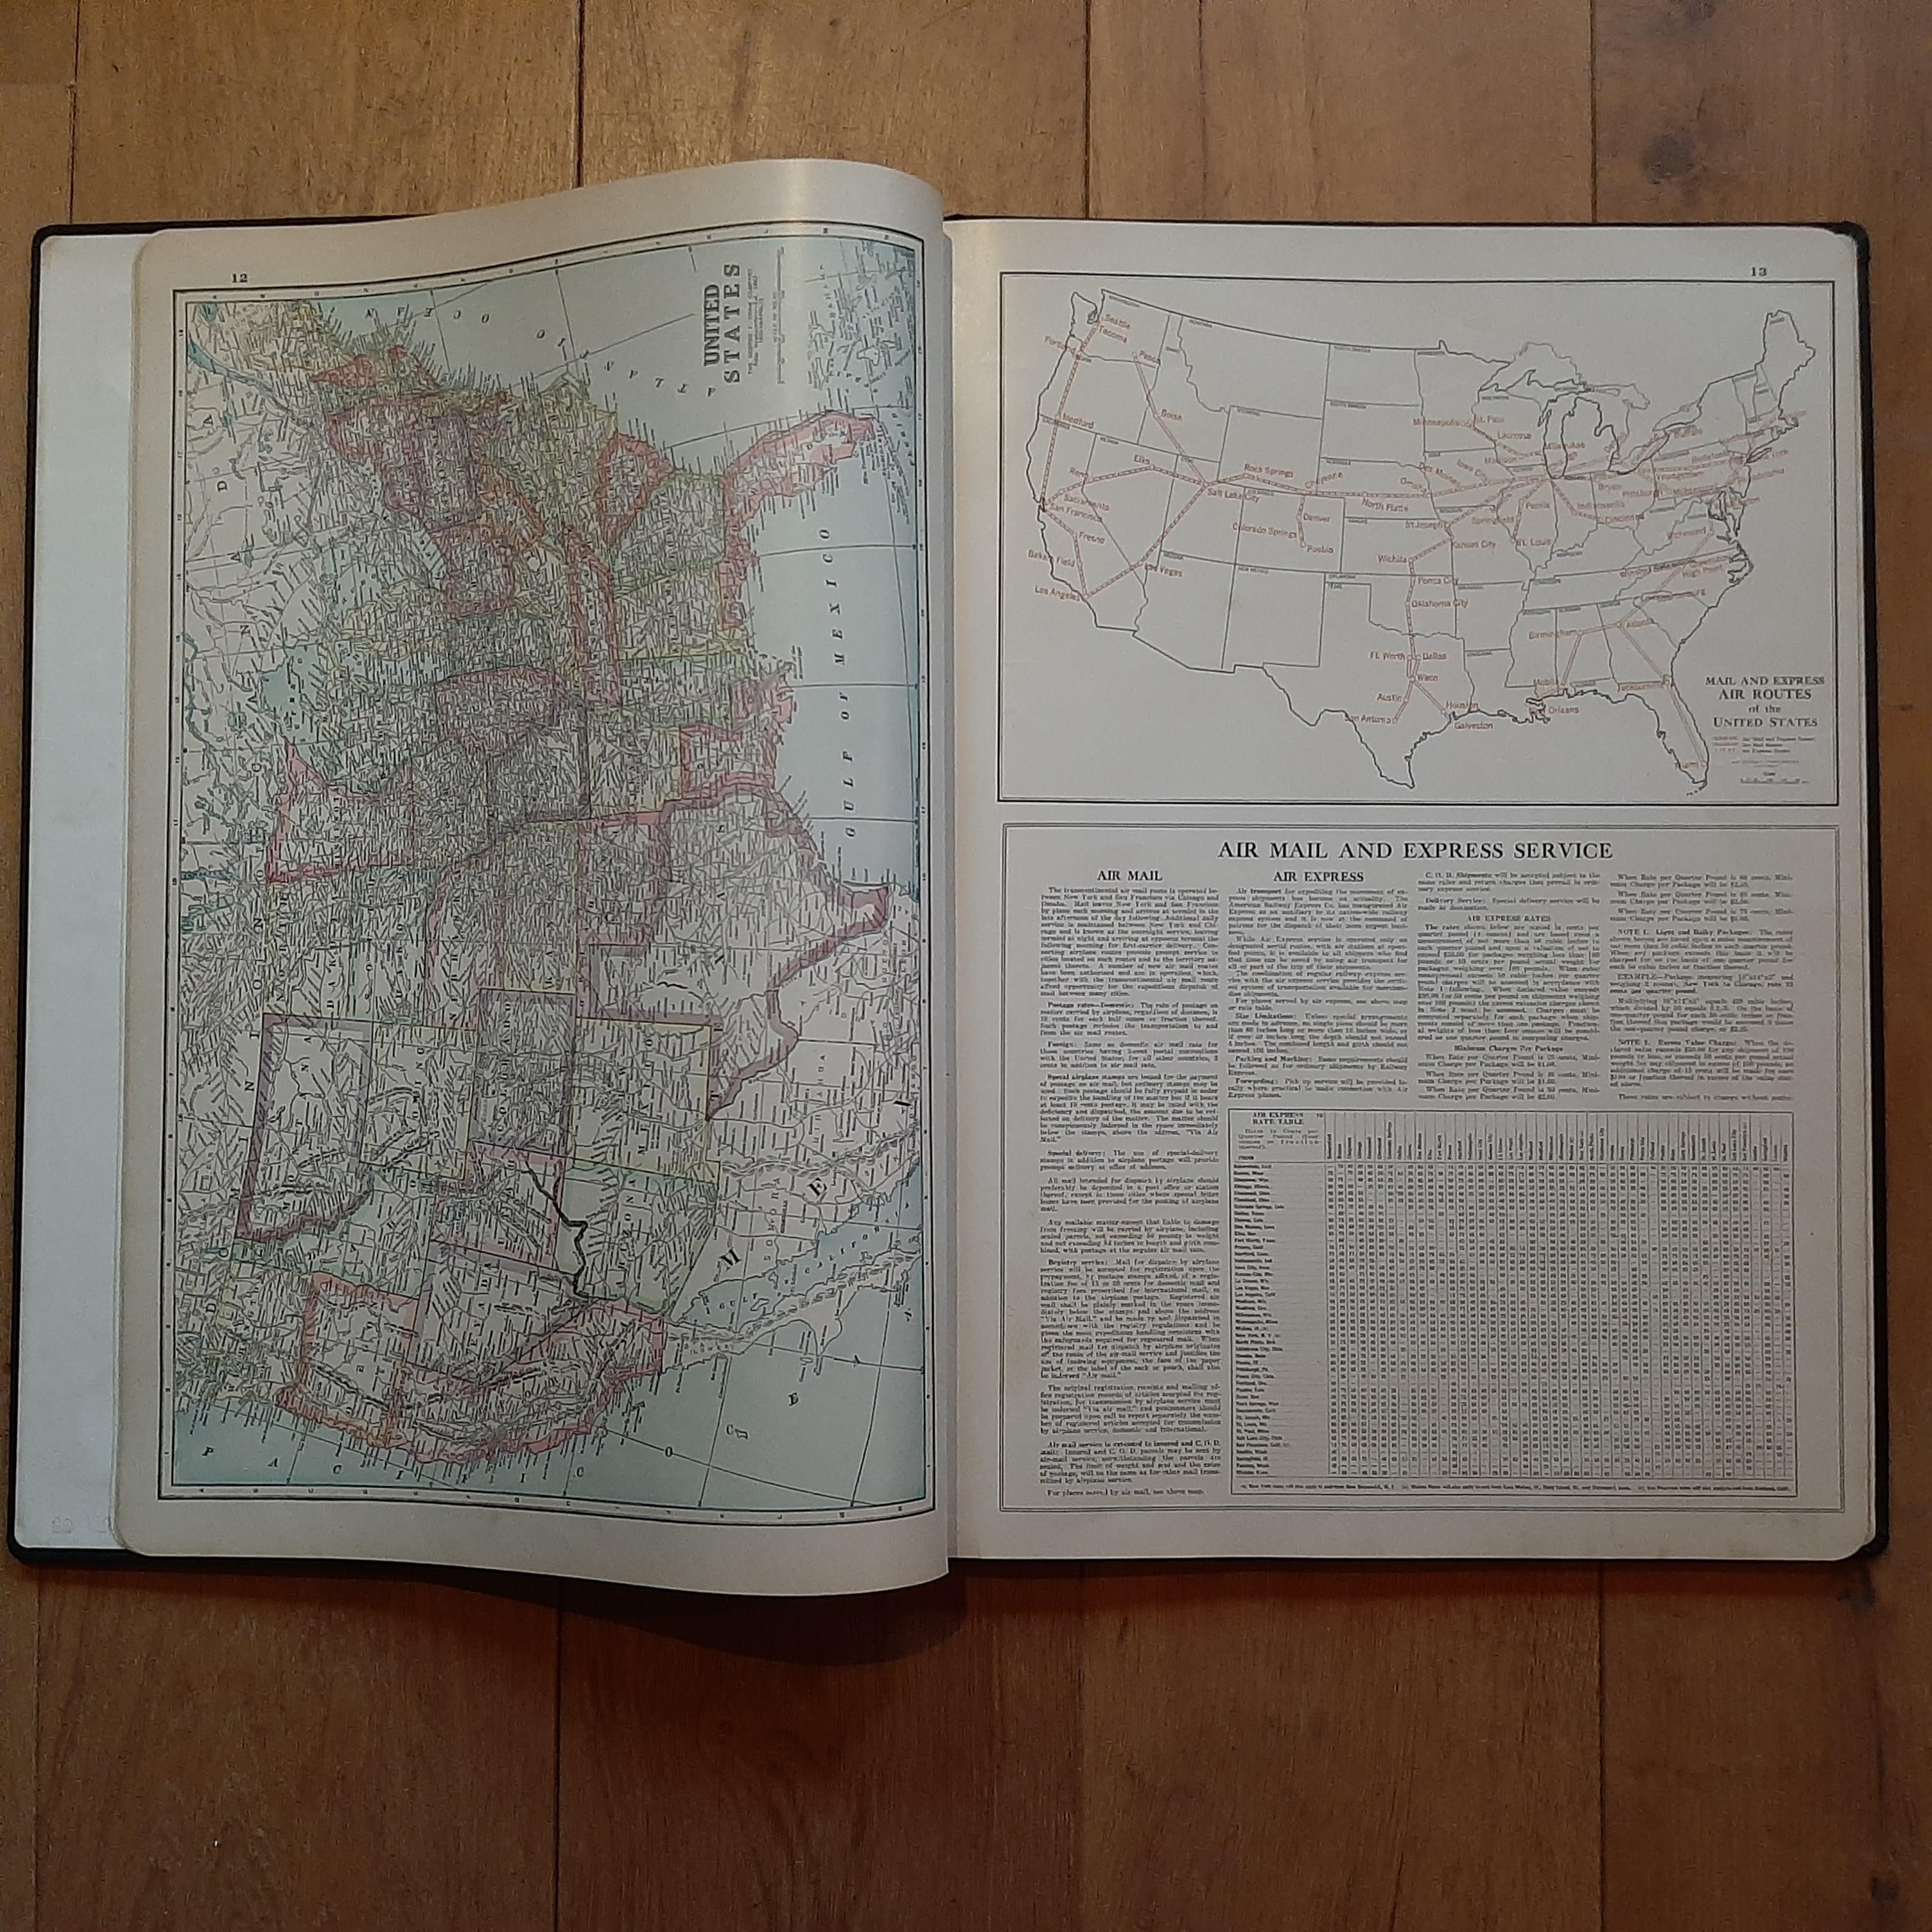 Paper Cram's Commercial Atlas by the George F. Cram Company 'circa 1930' For Sale